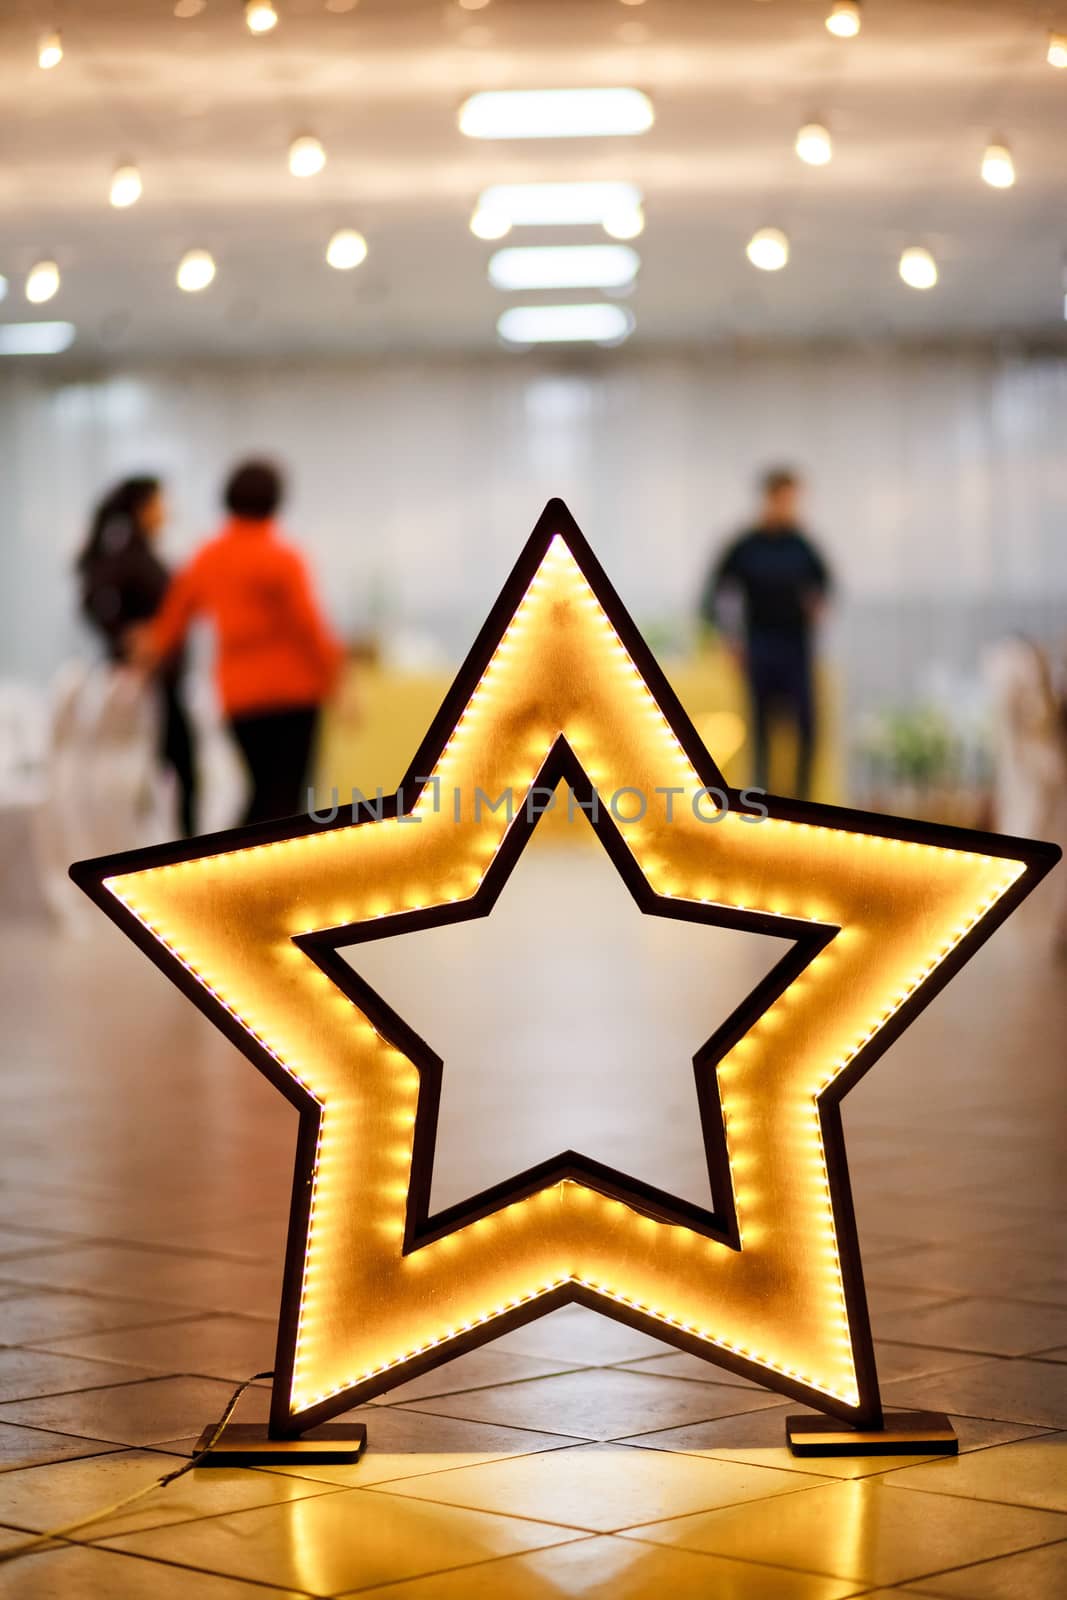 Decorative star made of wood with LED backlight on floor by Maynagashev